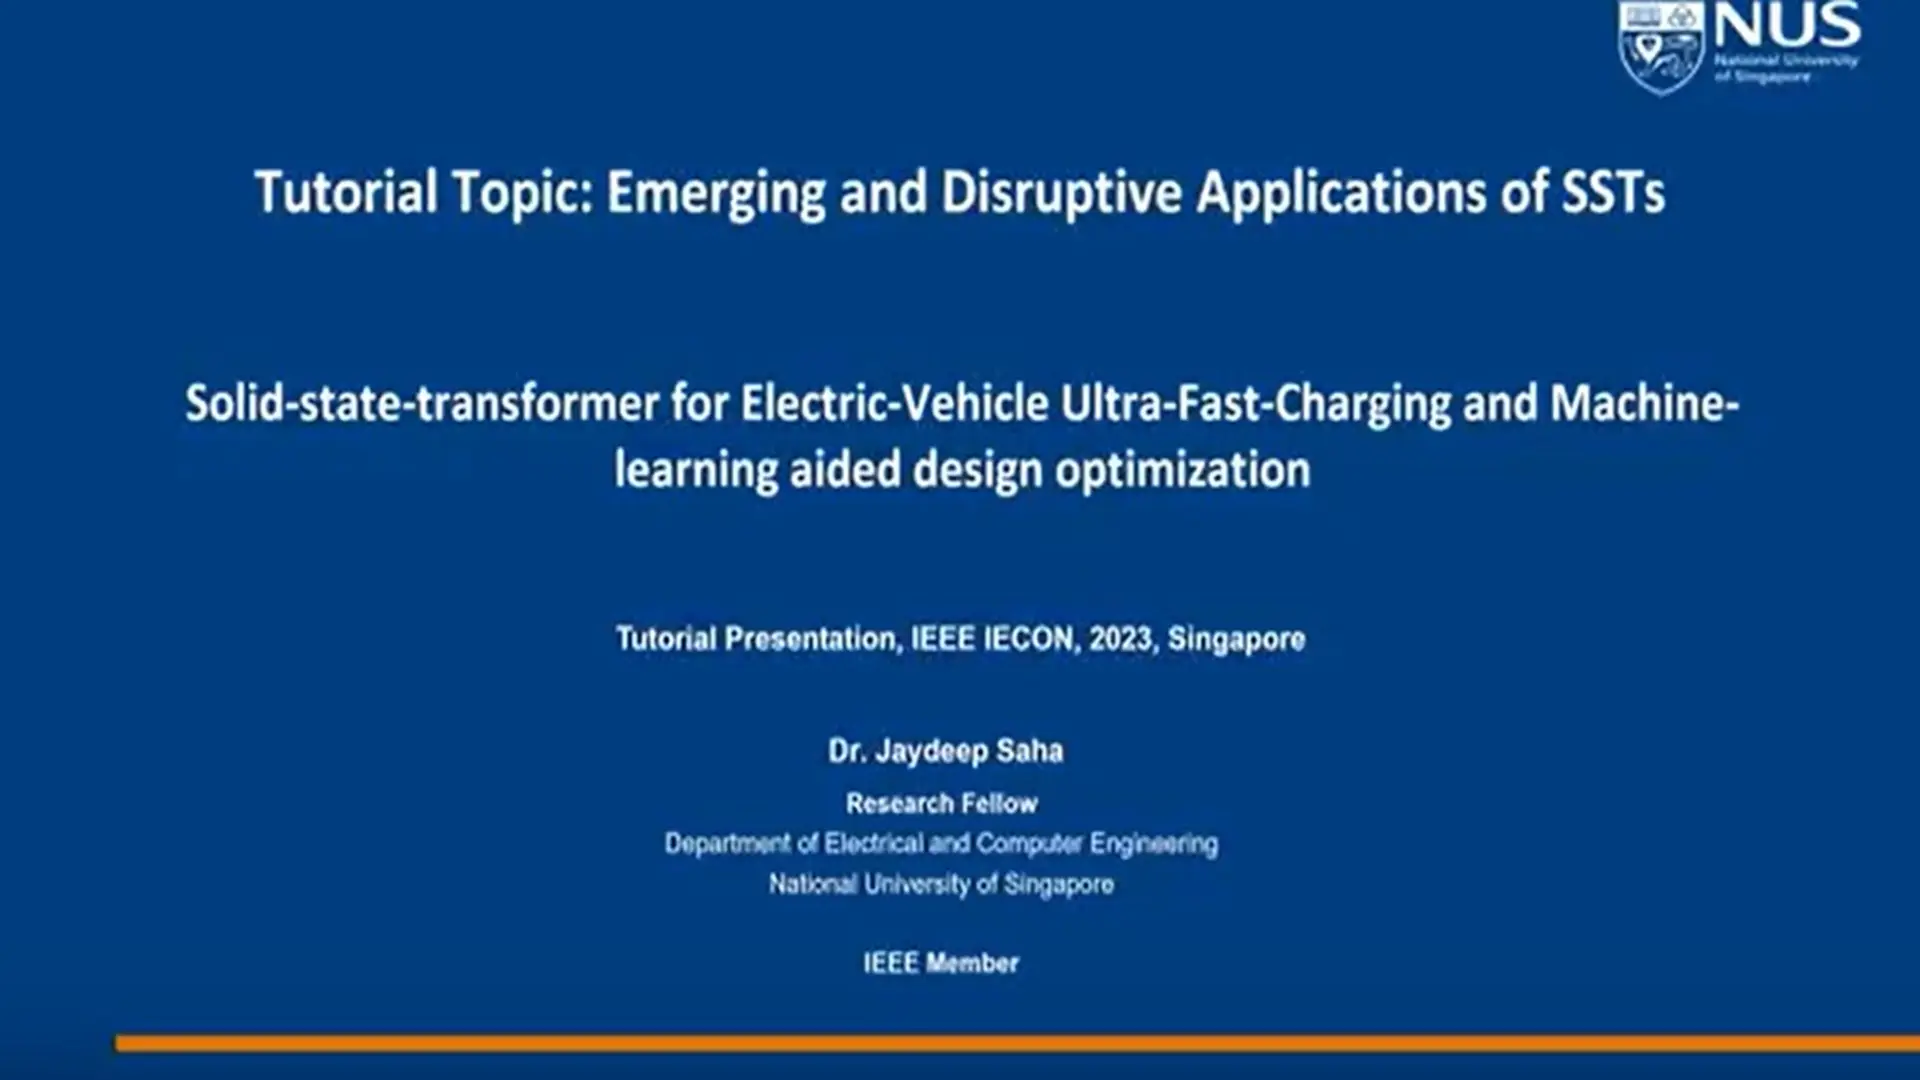 Emerging and Disruptive Applications of Solid State Transformers Part 2